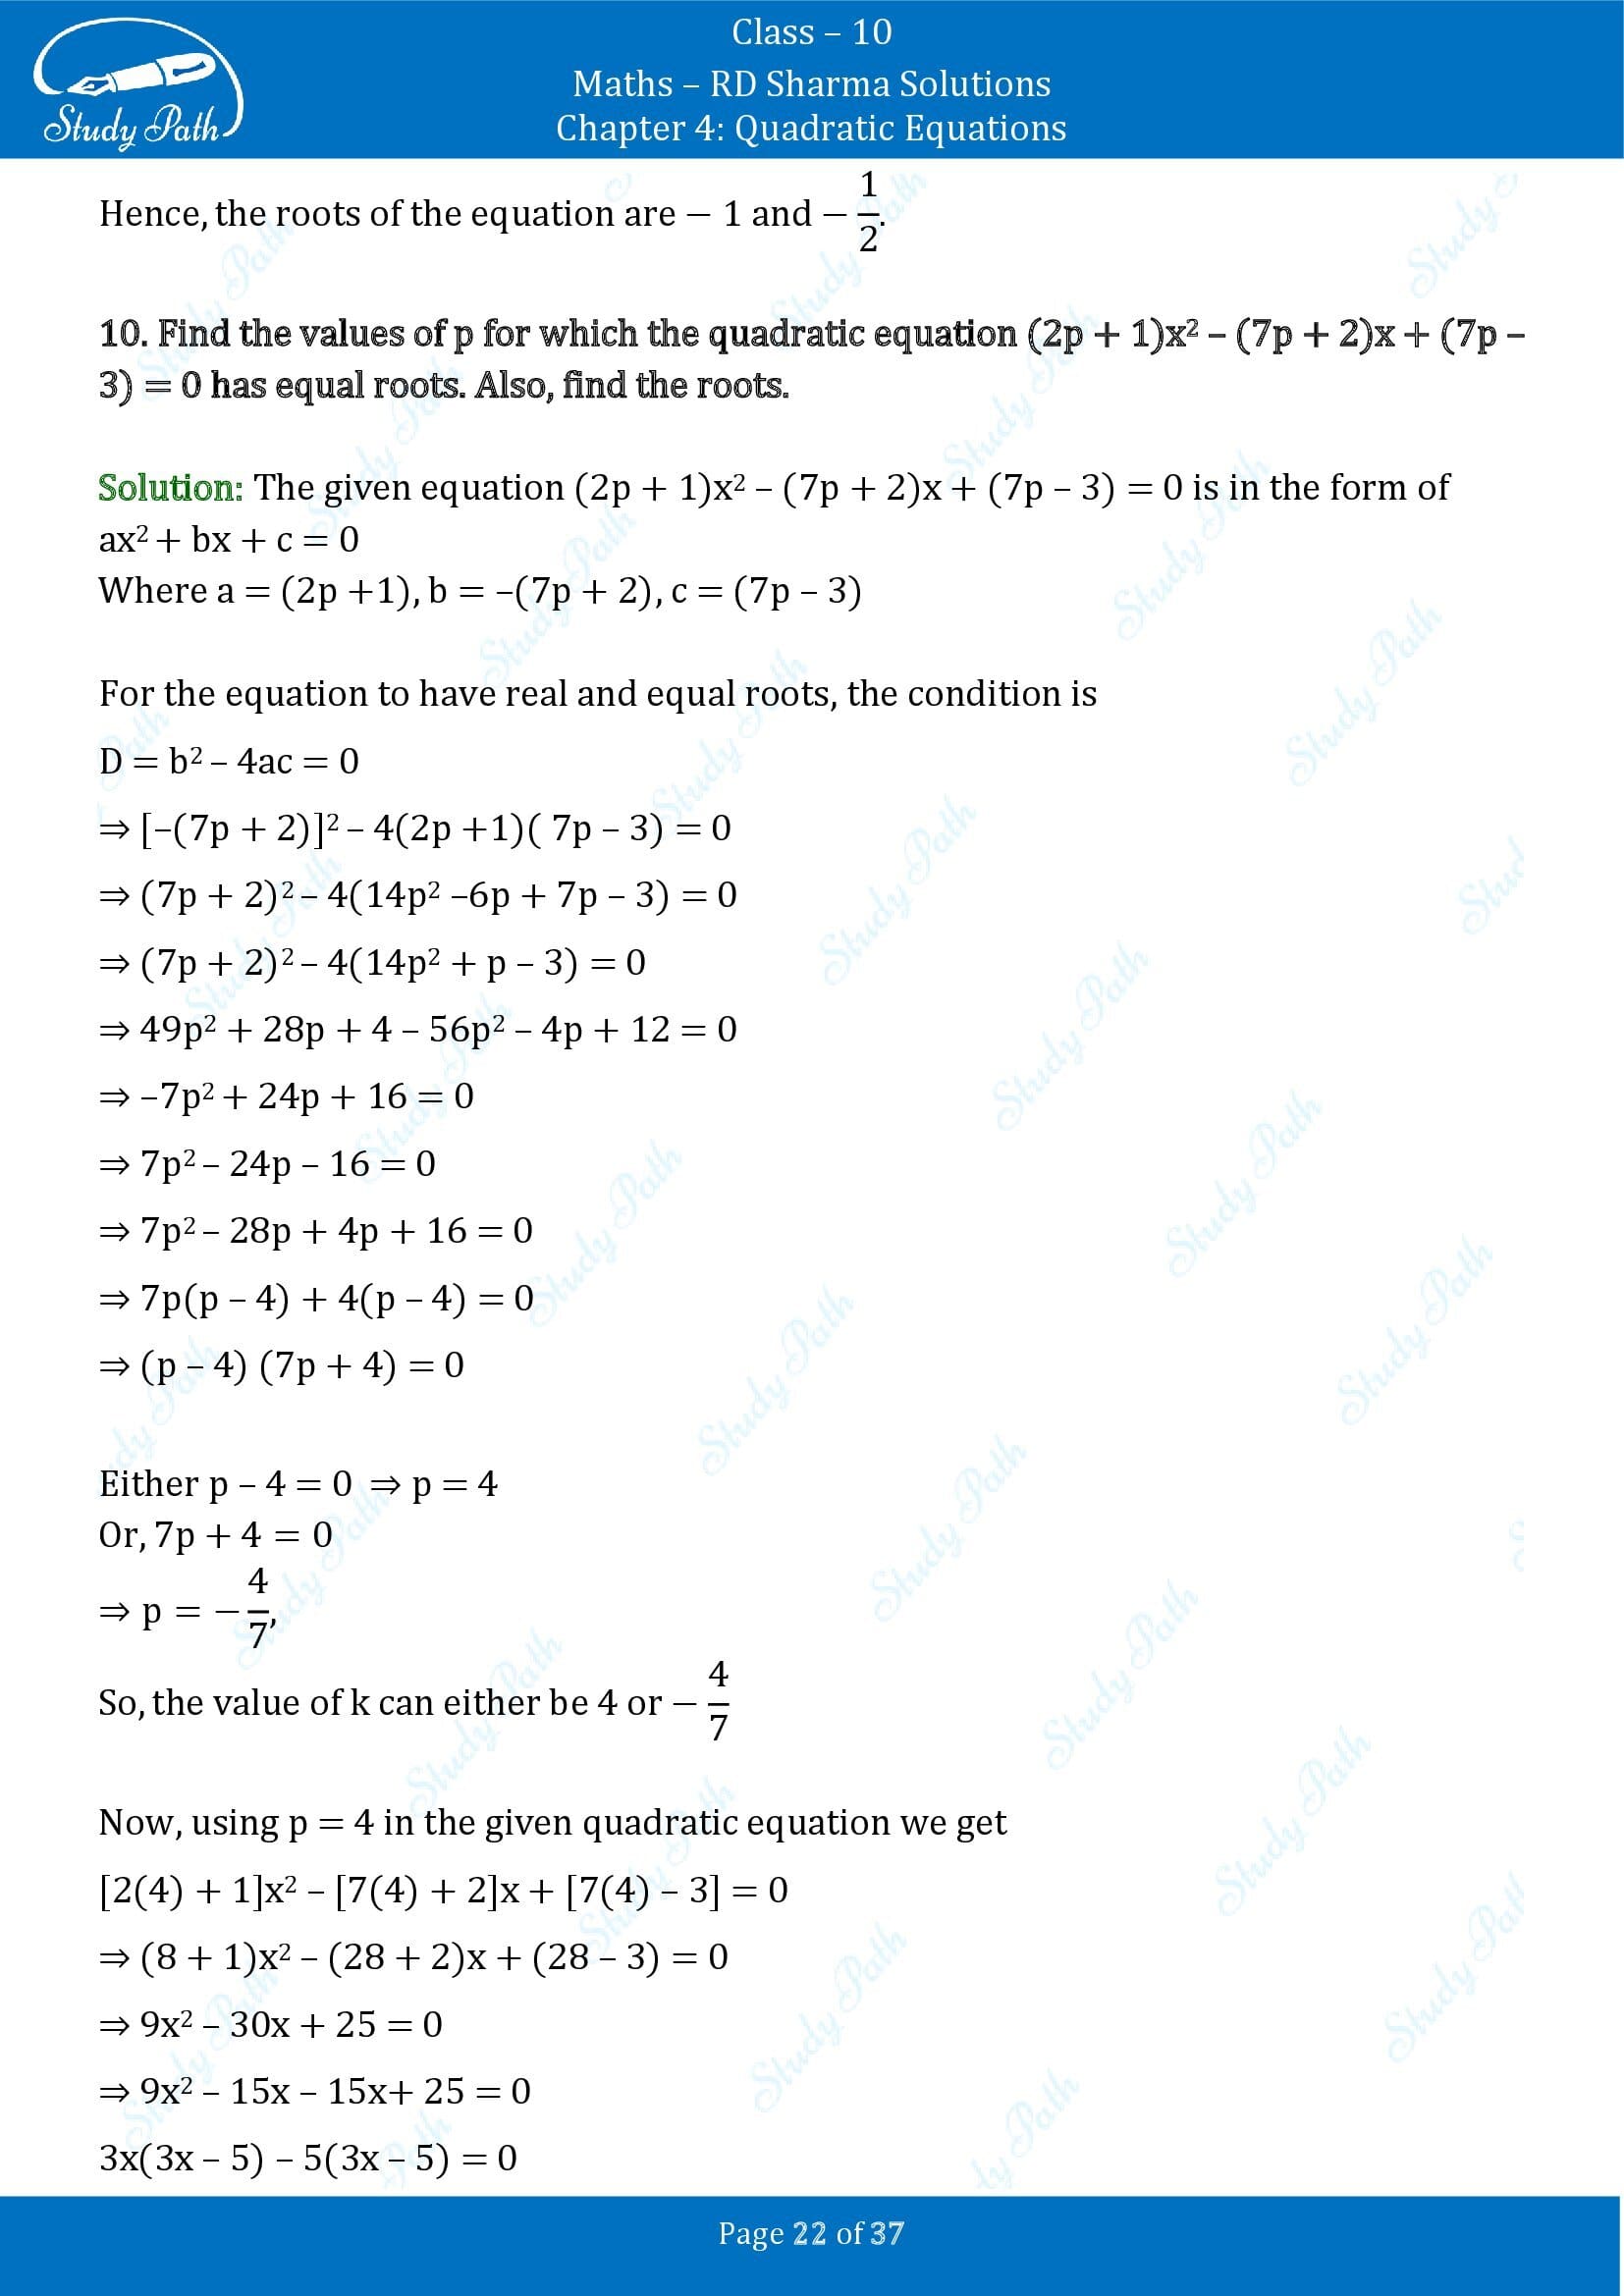 RD Sharma Solutions Class 10 Chapter 4 Quadratic Equations Exercise 4.6 00022